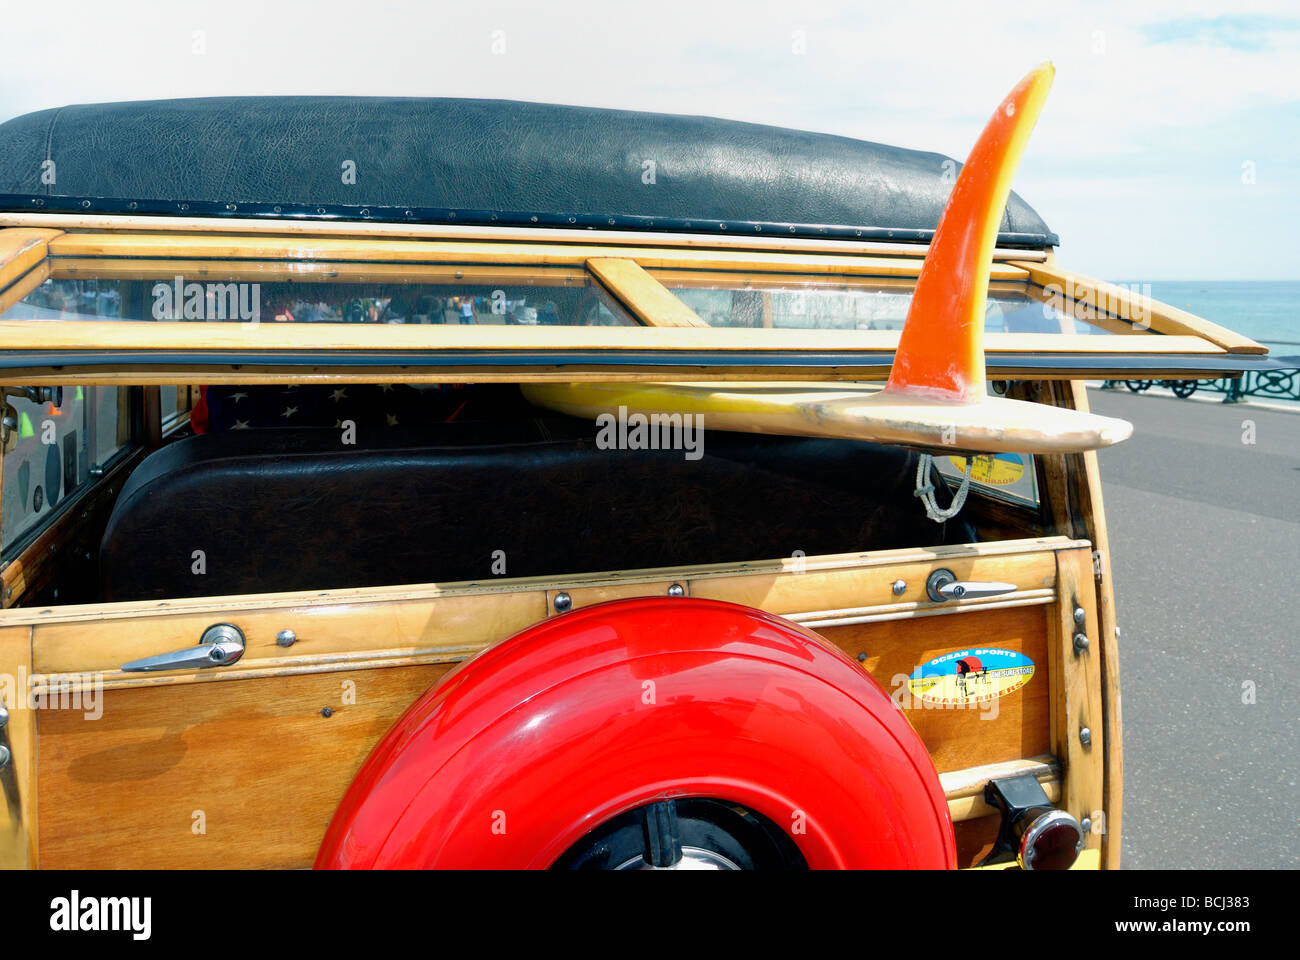 A surfboard loaded on a classic old car Stock Photo